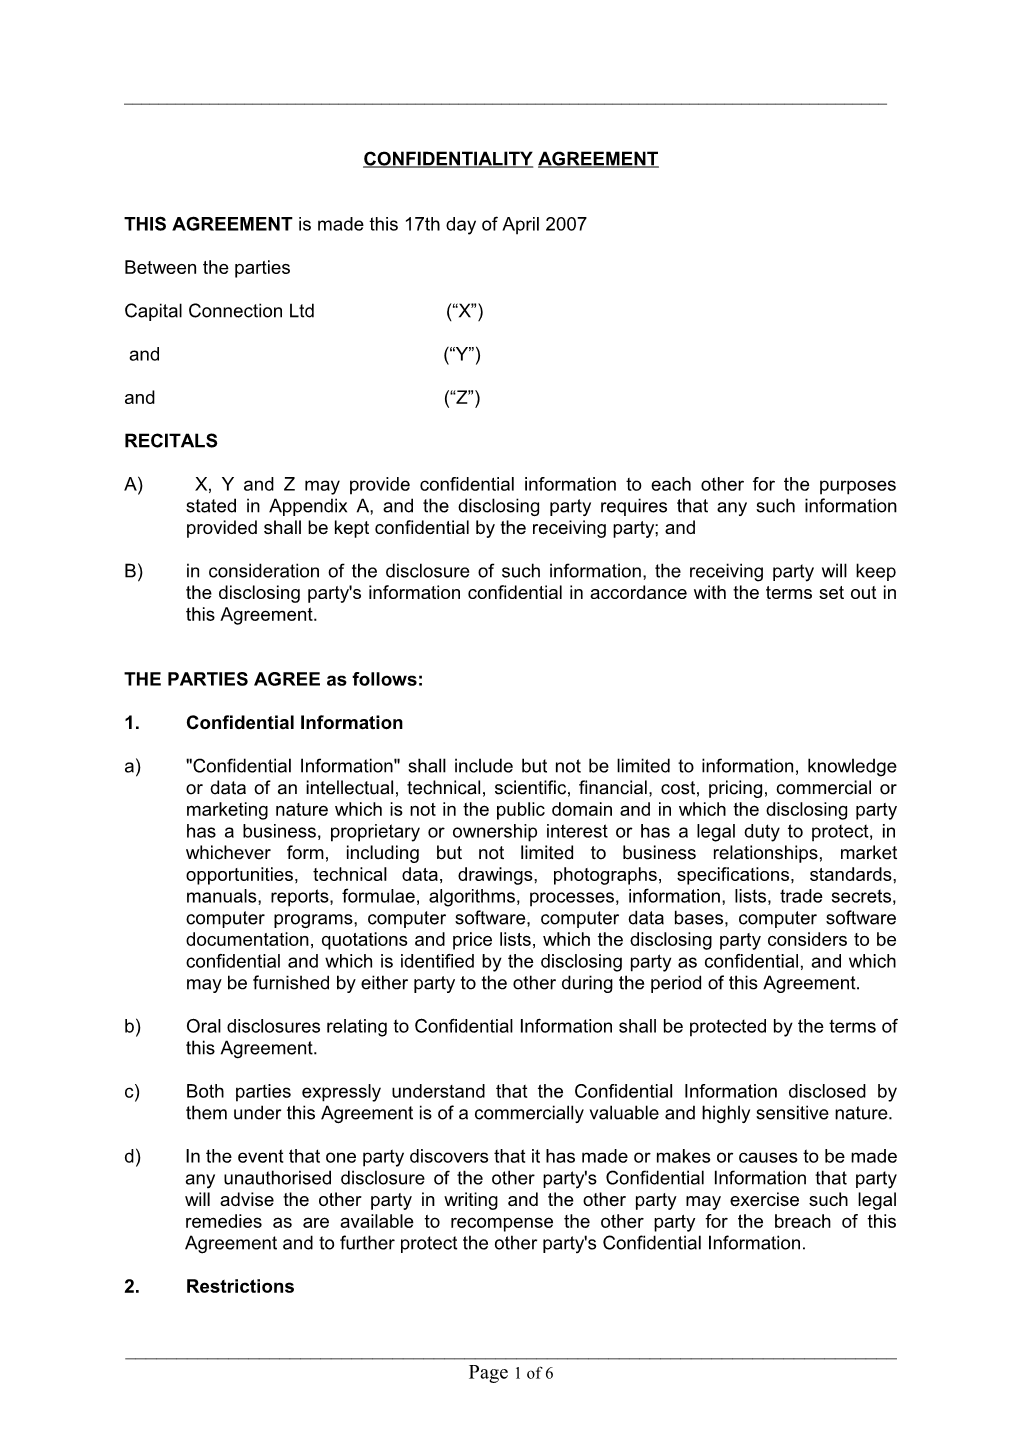 Confidentiality Agreement s8